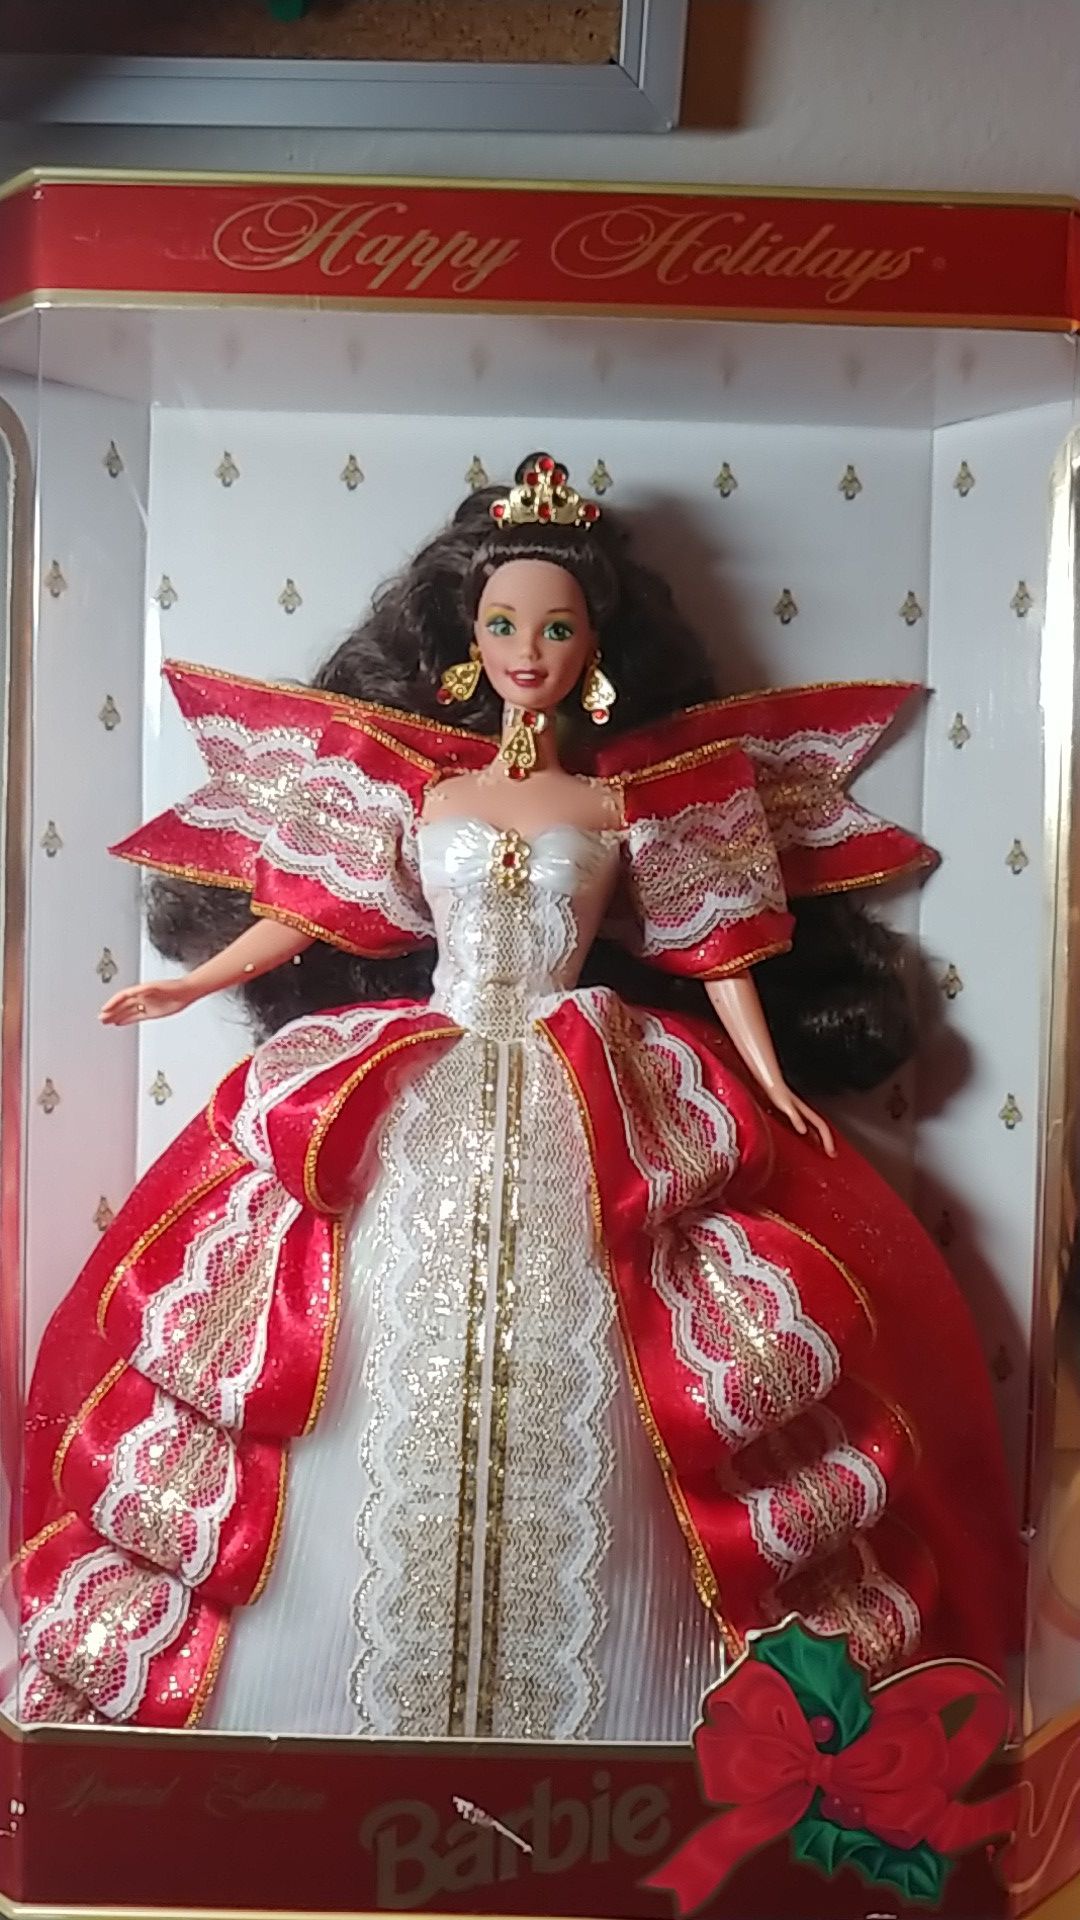 Special Edition Happy Holidays Barbie from 1997